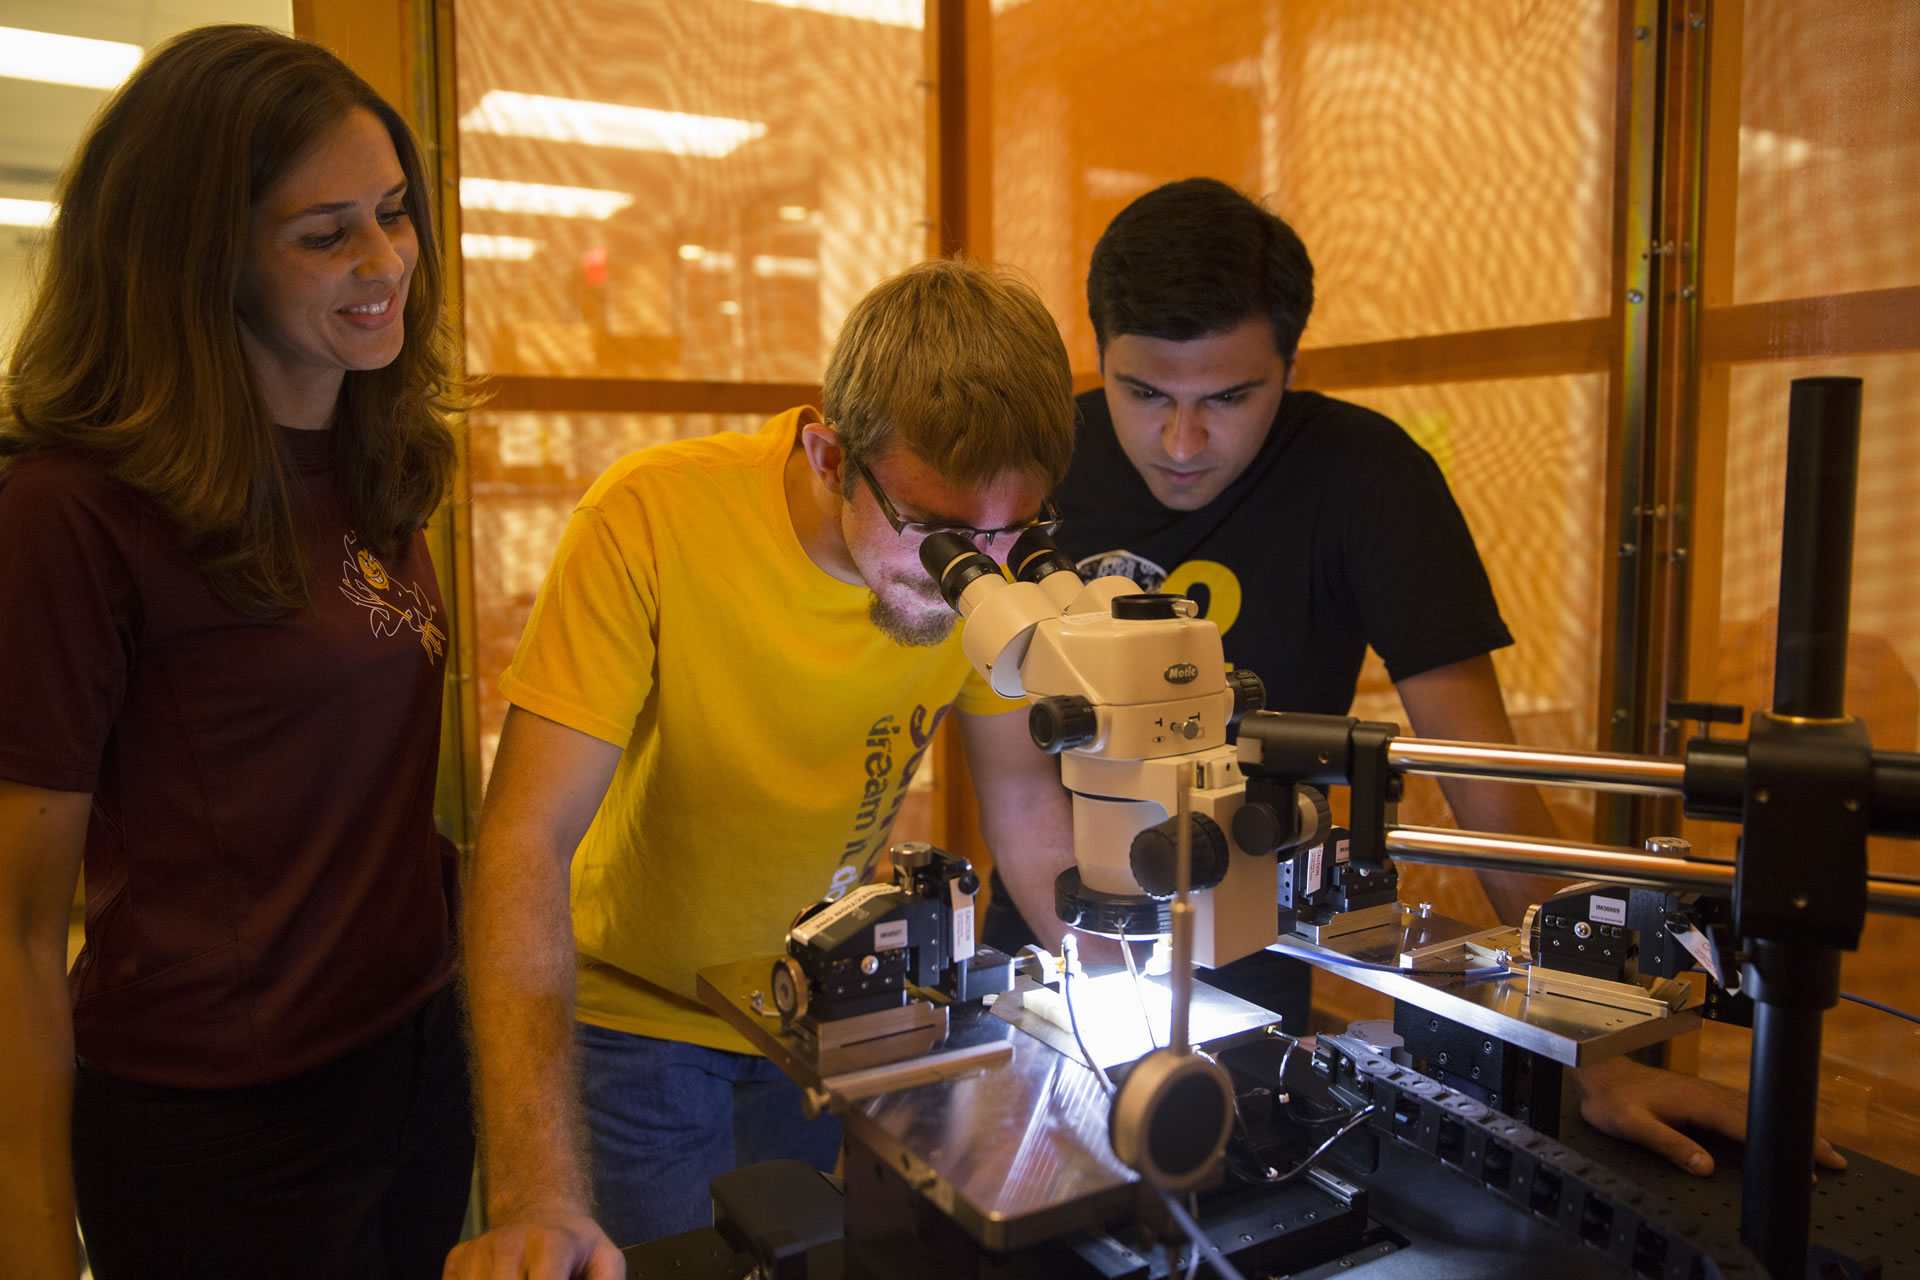 ASU Prof. Jennifer Kitchen with two young male students, one looking through microscope